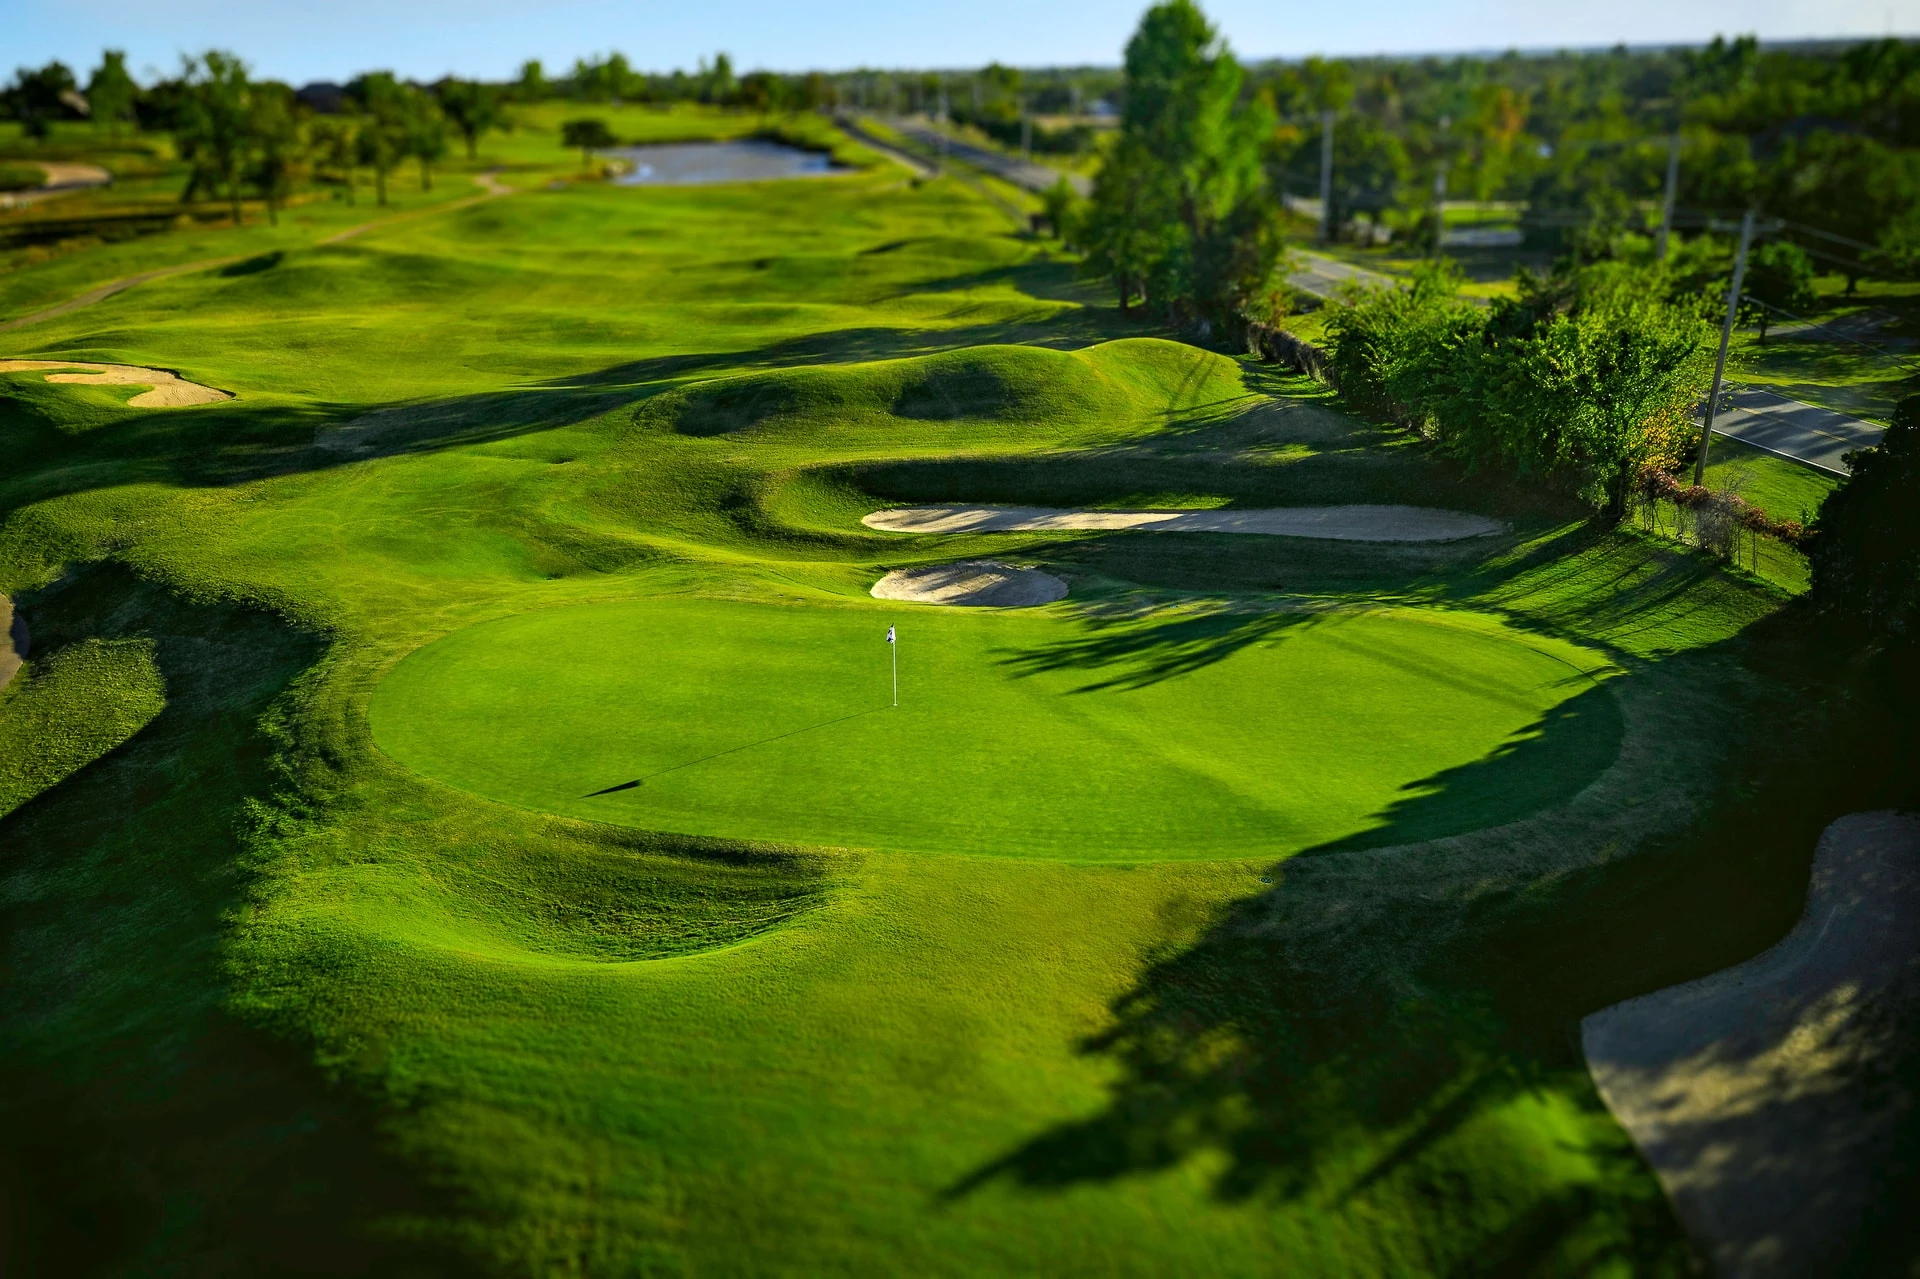 A drone image of The 9th Hole on The West Course at Oak Creek Country Club